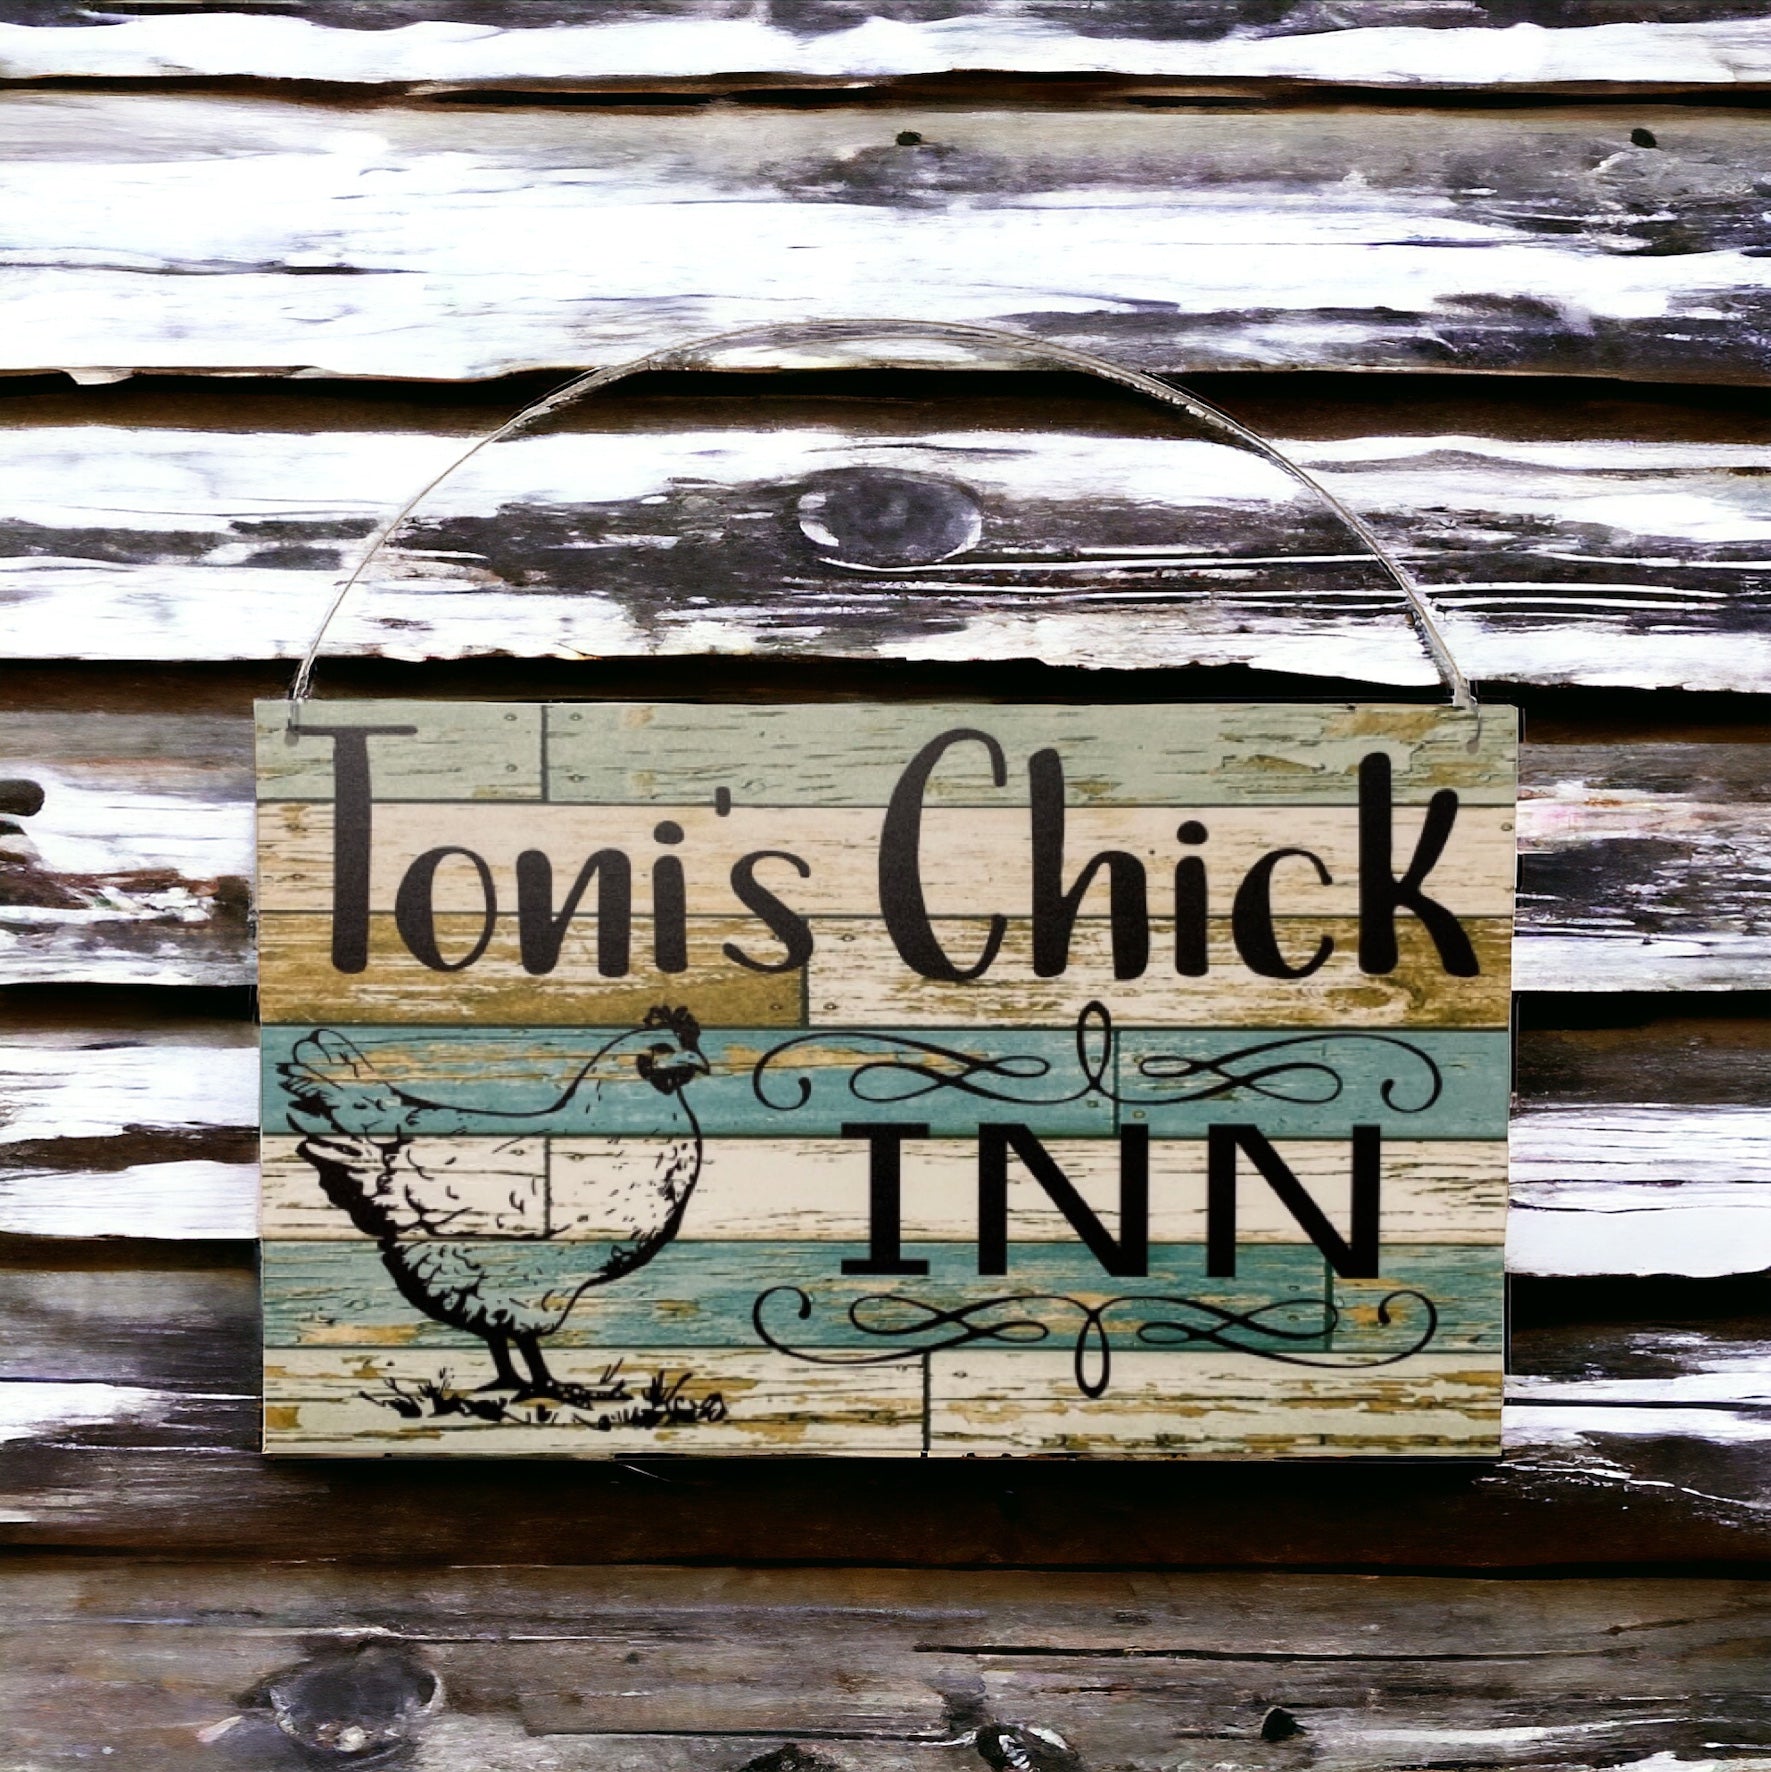 Chicken Chick Inn Custom Personalised Sign - The Renmy Store Homewares & Gifts 